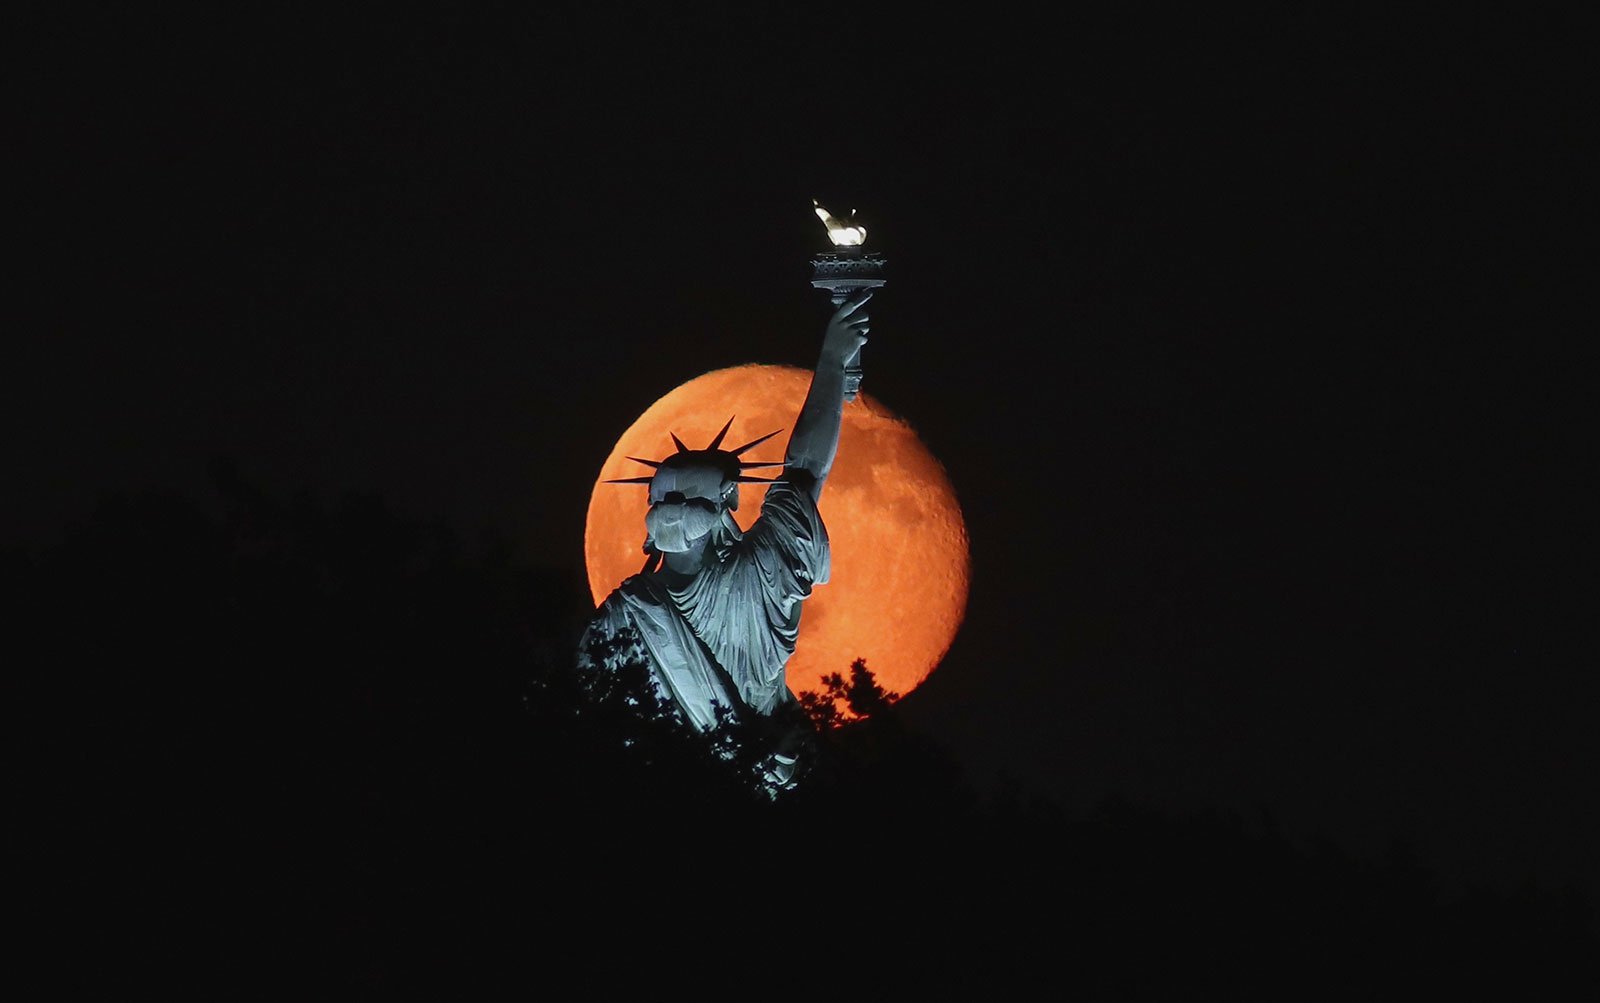 NYC Statue of Liberty in front of super moon